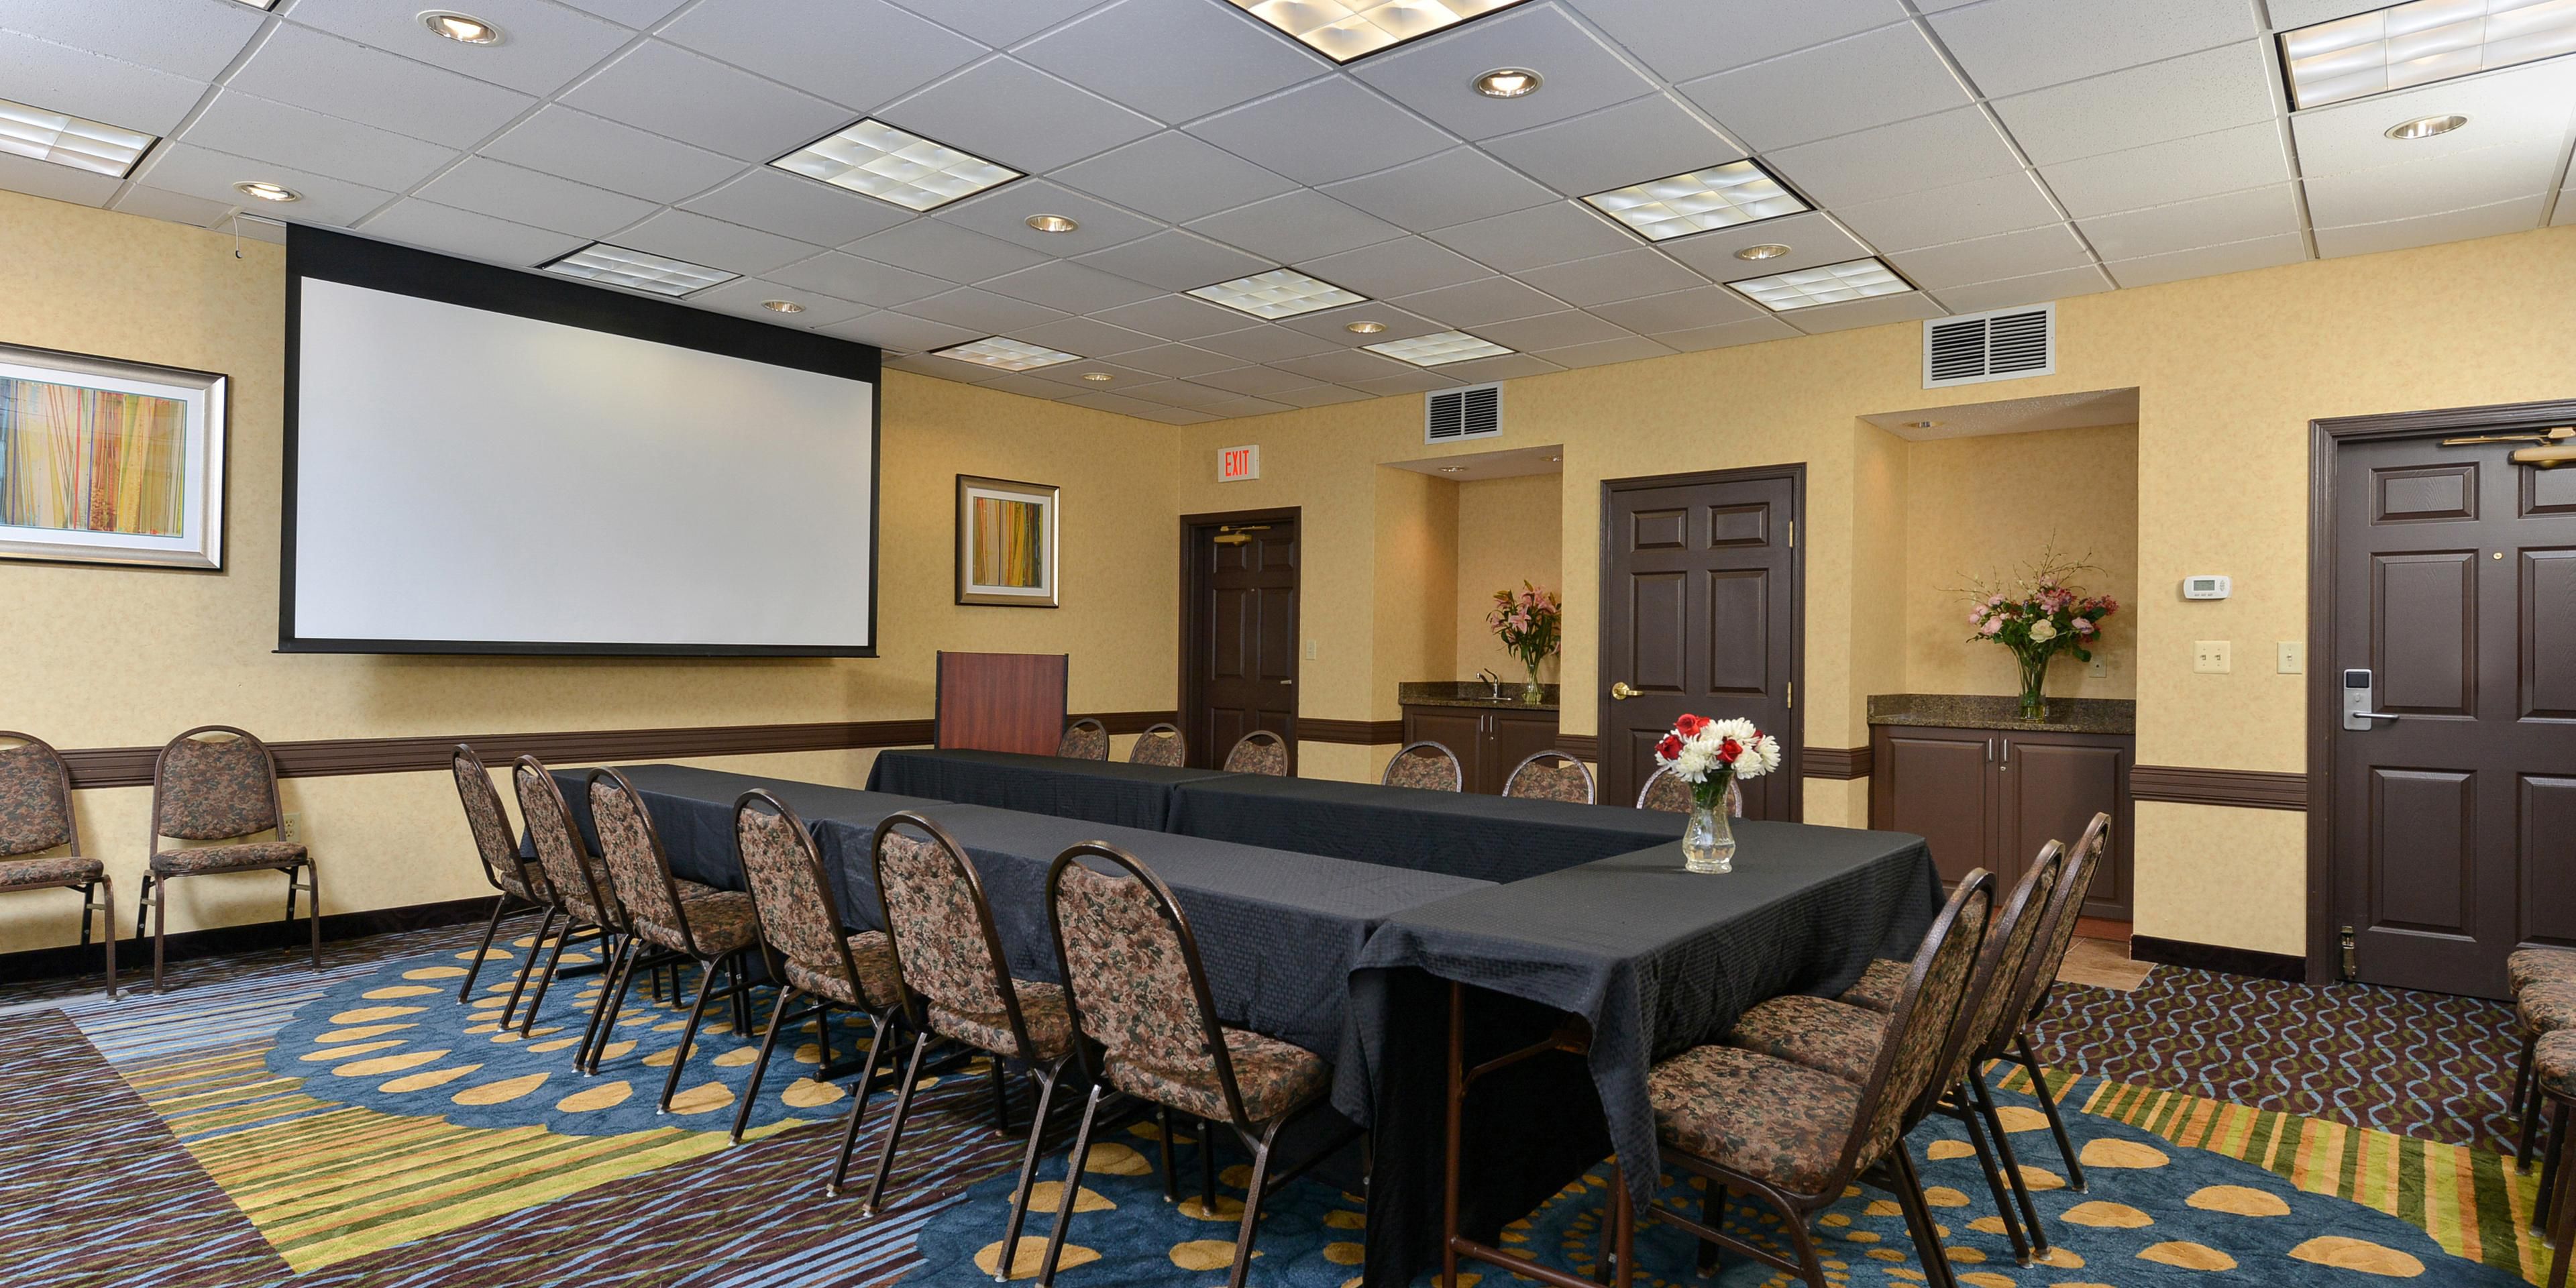 Have a small group that needs to quiet place to meet? We have the meeting room for you! Contact our hotel directly for availability and group pricing, 651-450-1100